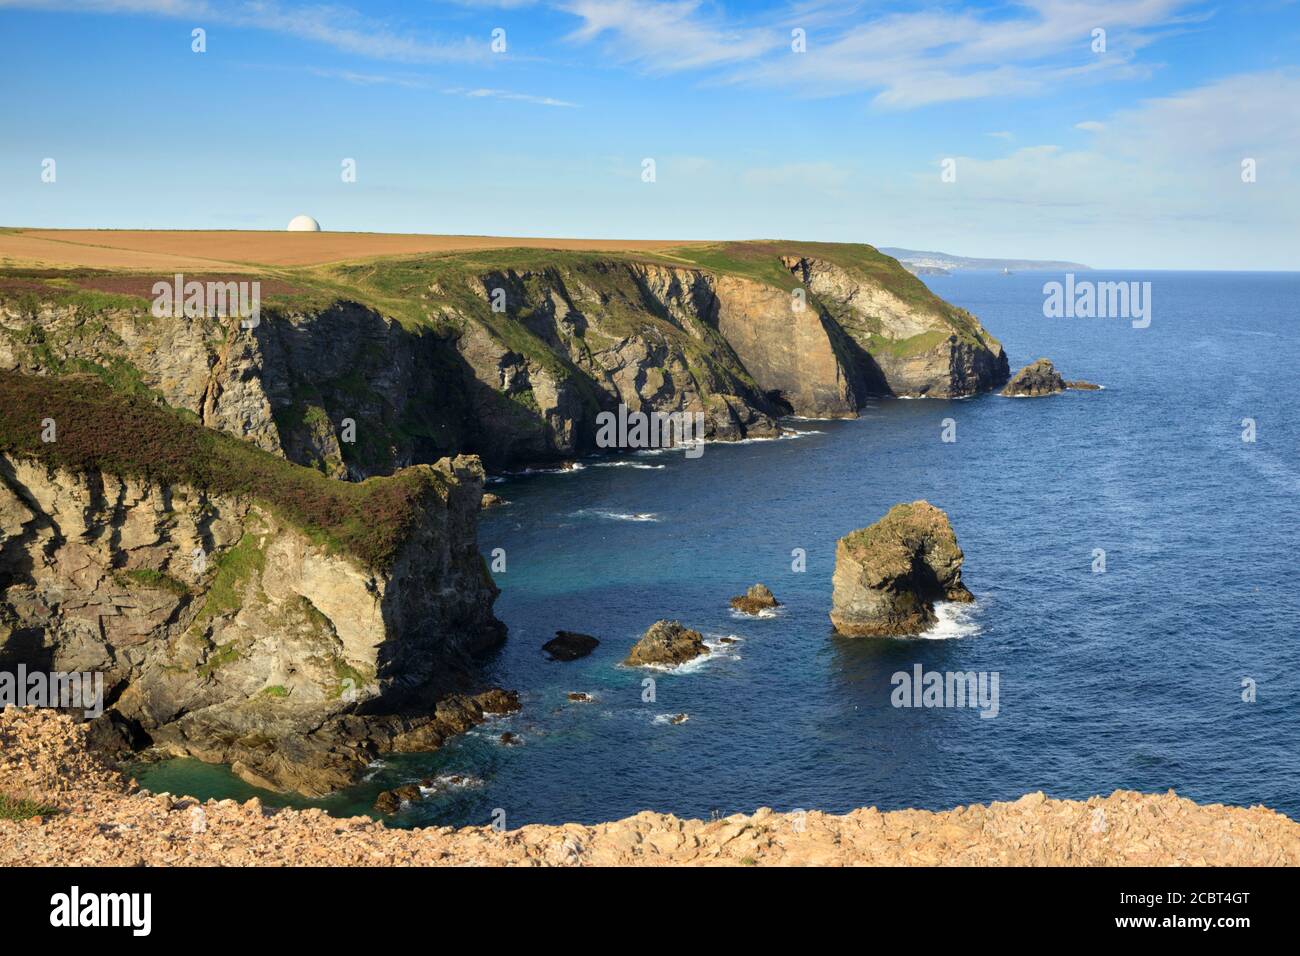 A view of Gullyn Rock on the coast path between Porthtowan and Portreath in Cornwall. Stock Photo